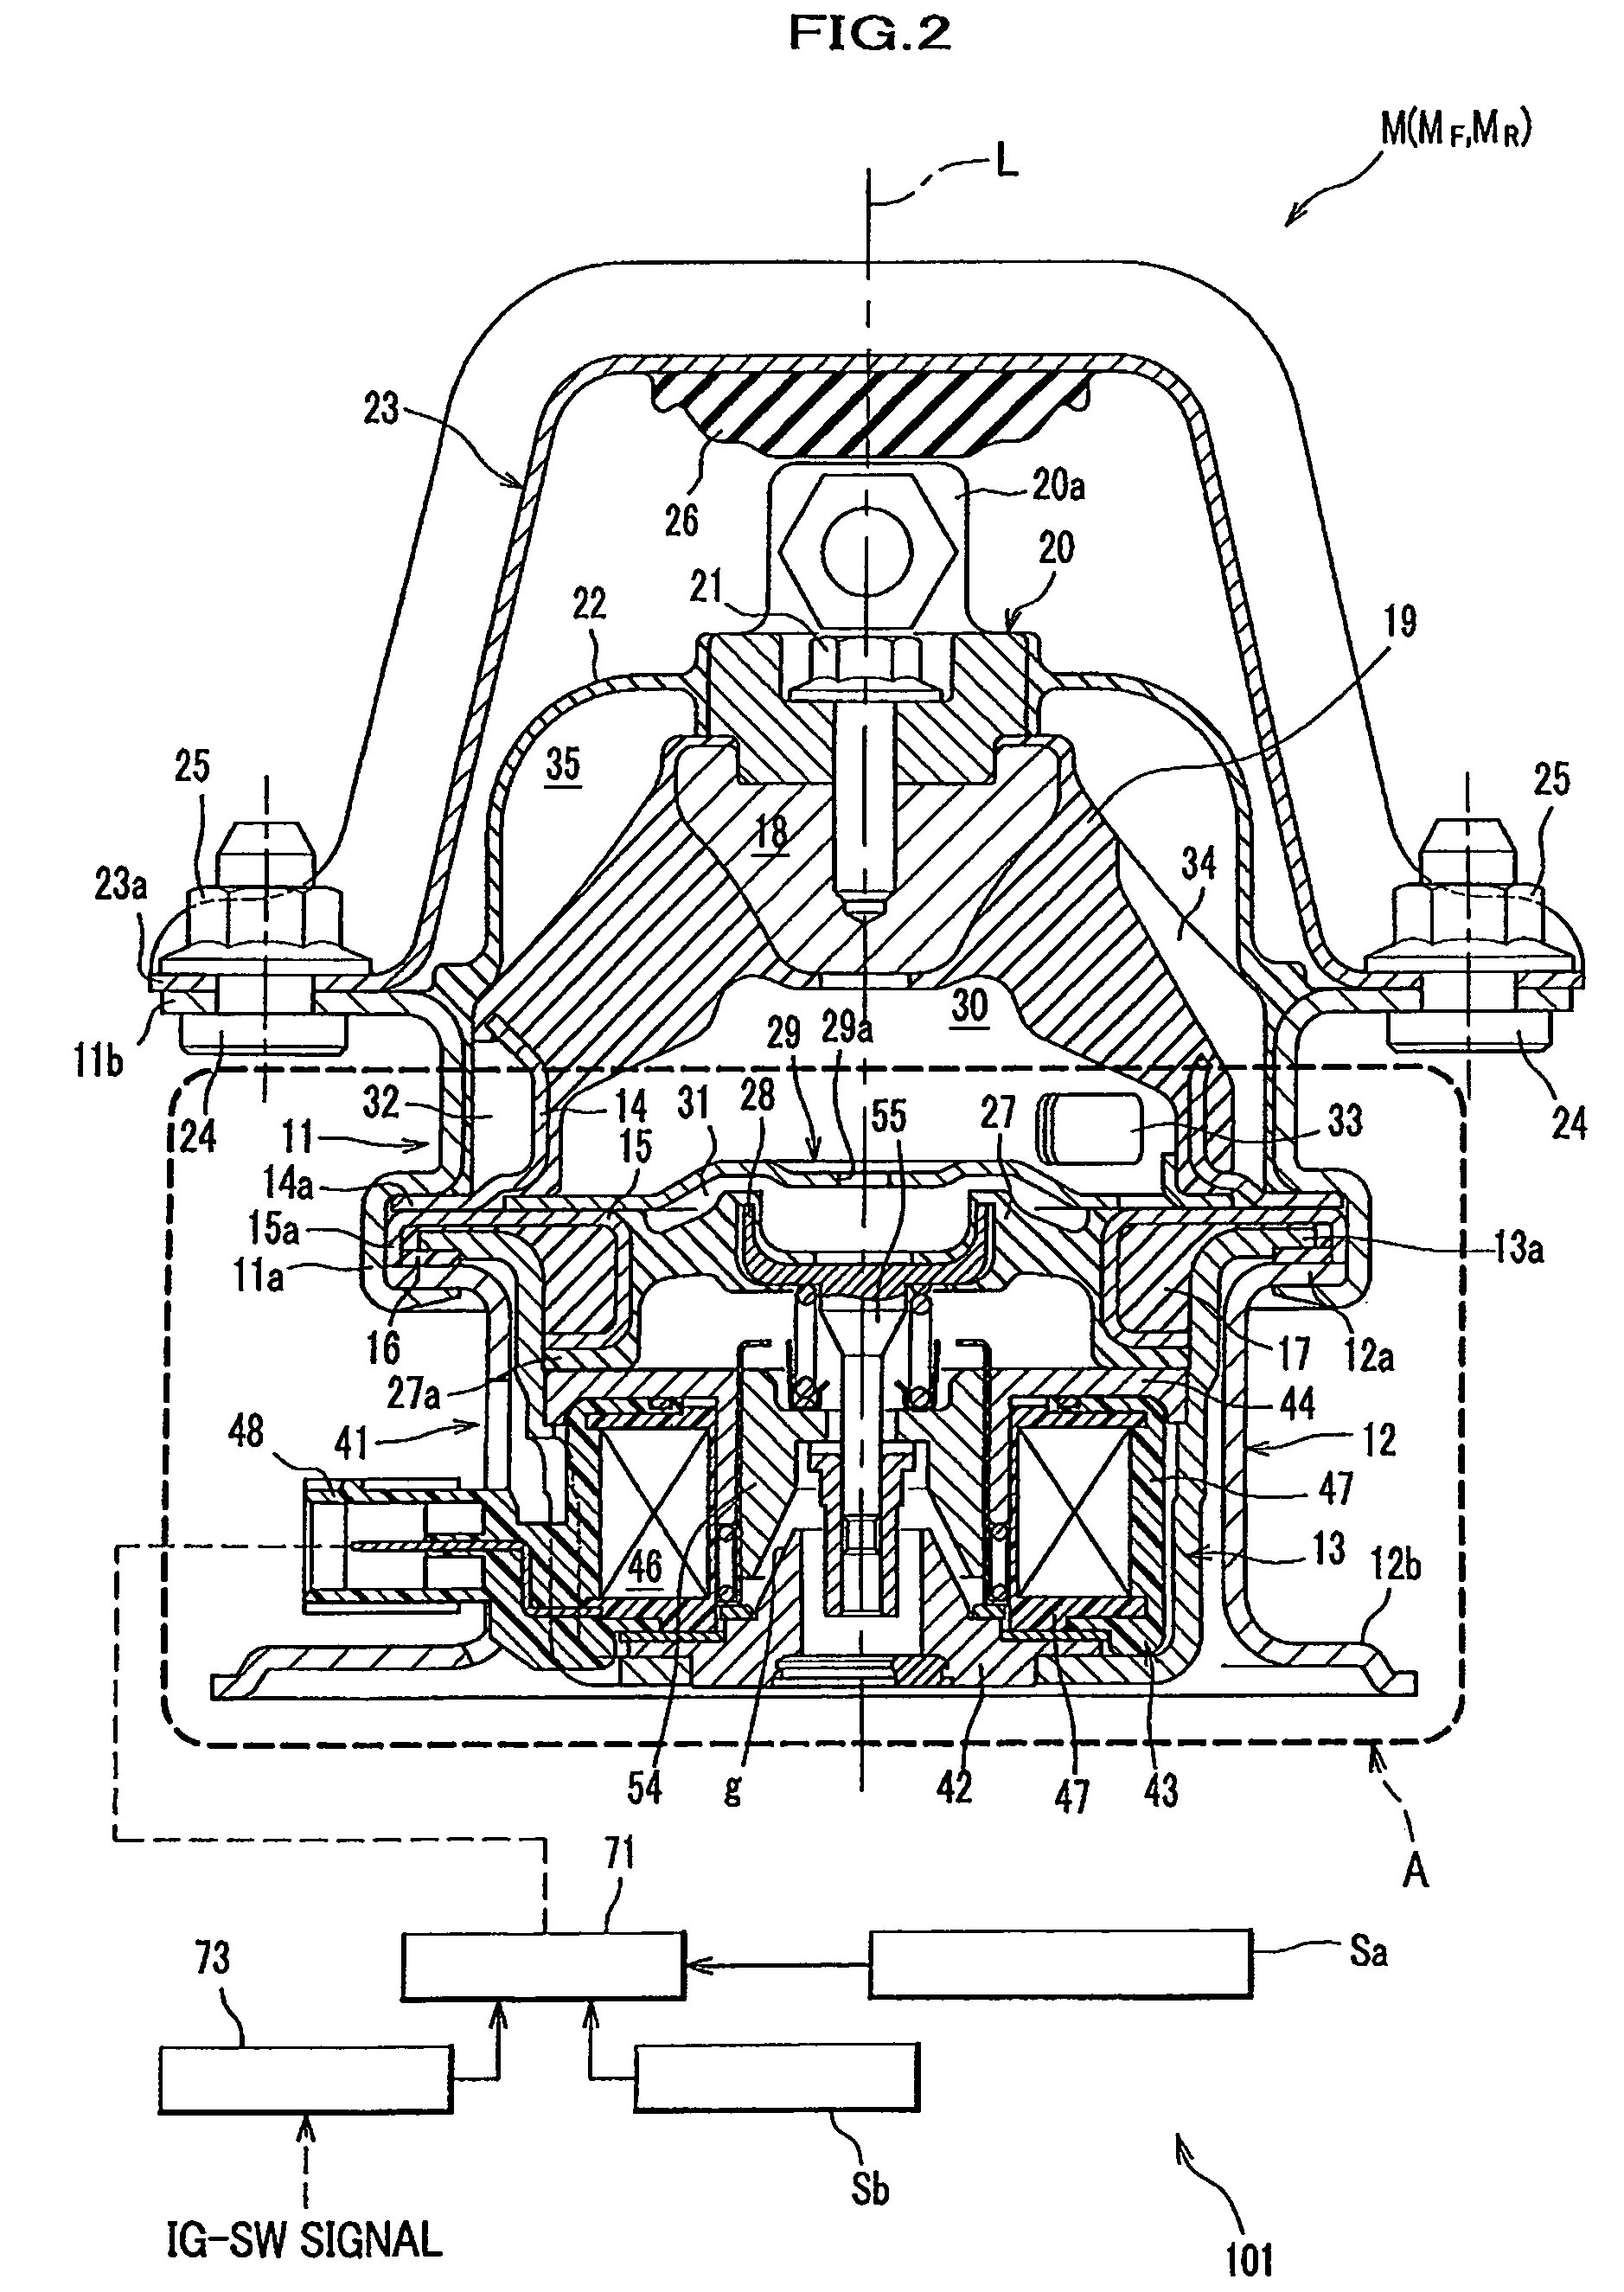 Active vibration isolating support apparatus